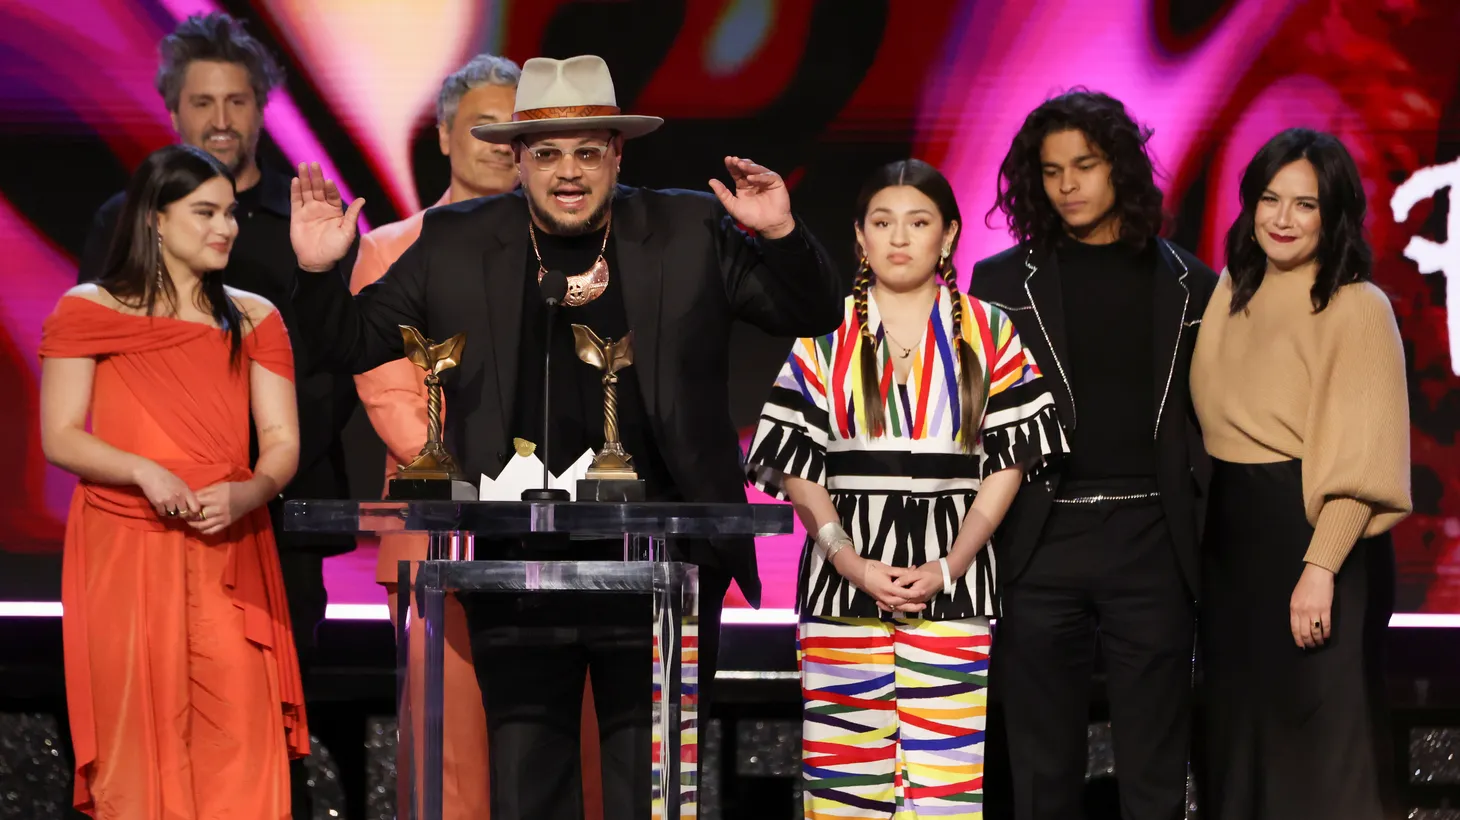 Producer Sterlin Harjo receives the Best New Scripted Series award for "Reservation Dogs" at the 37th Film Independent Spirit Awards in Santa Monica, California, on March 6, 2022.